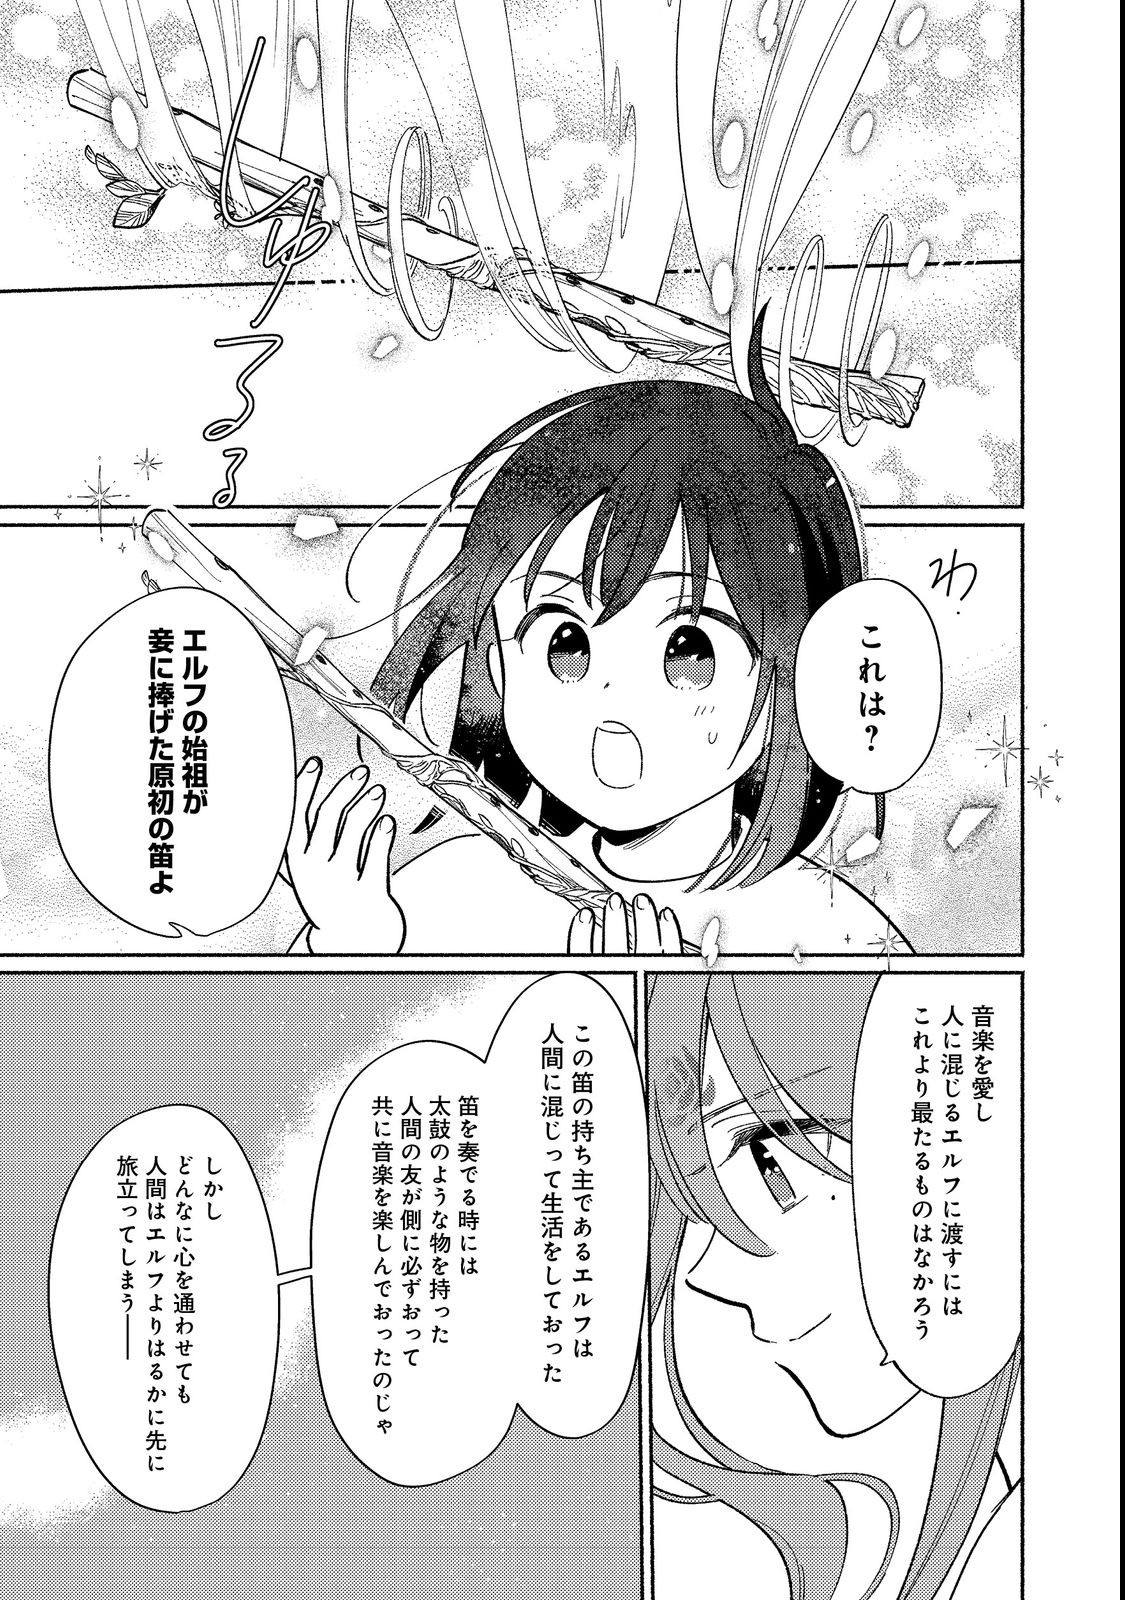 I’m the White Pig Nobleman 第17.2話 - Page 8